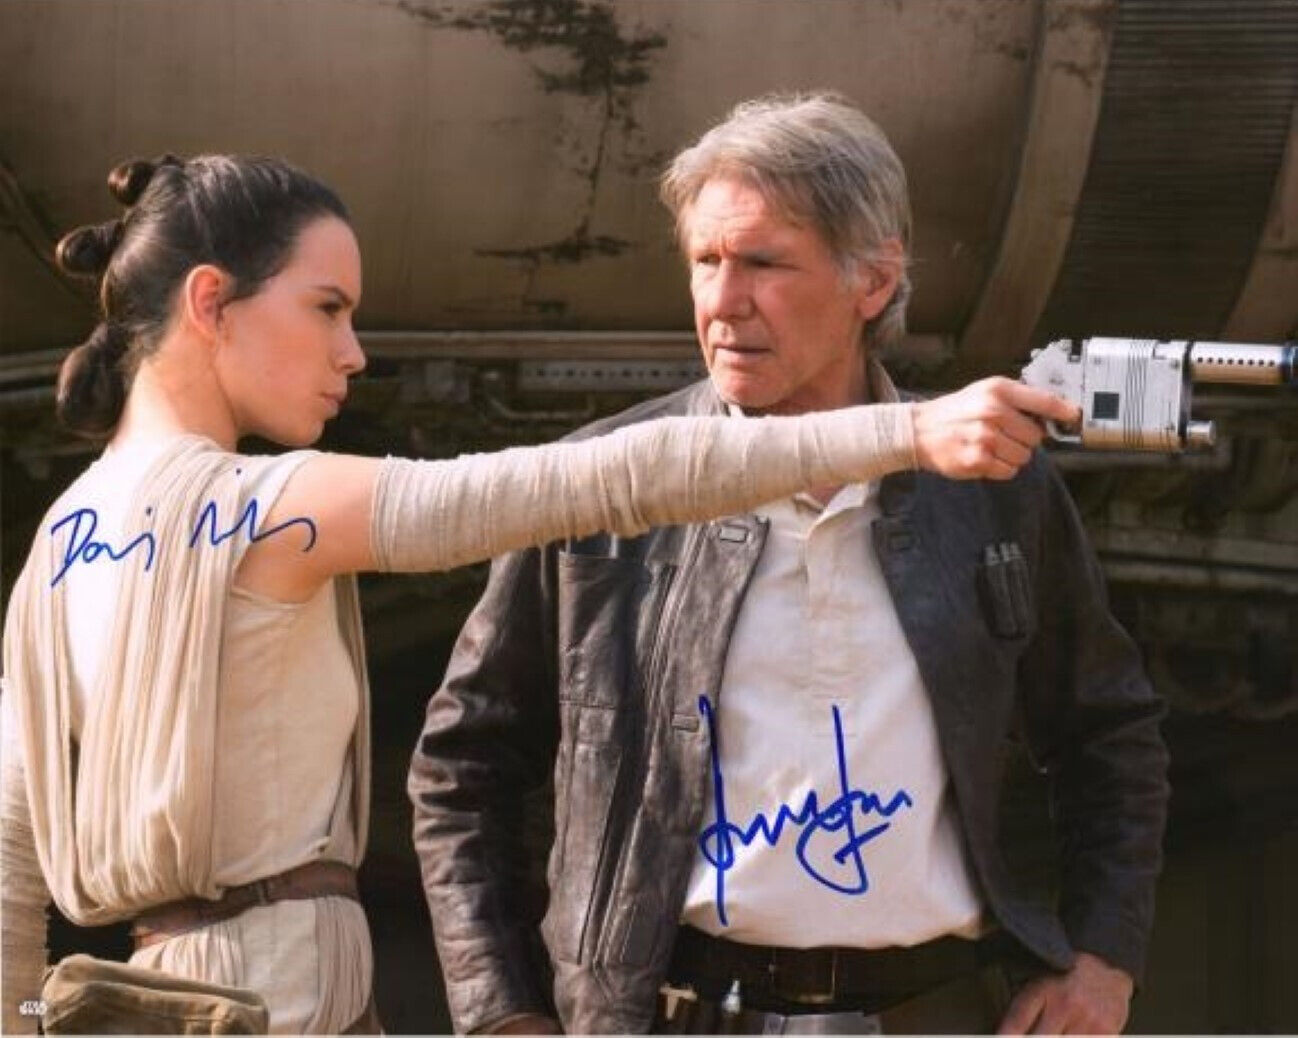 Star Wars Harrison Ford & Daisy Ridley 8.5x11 signed Photo Reprint